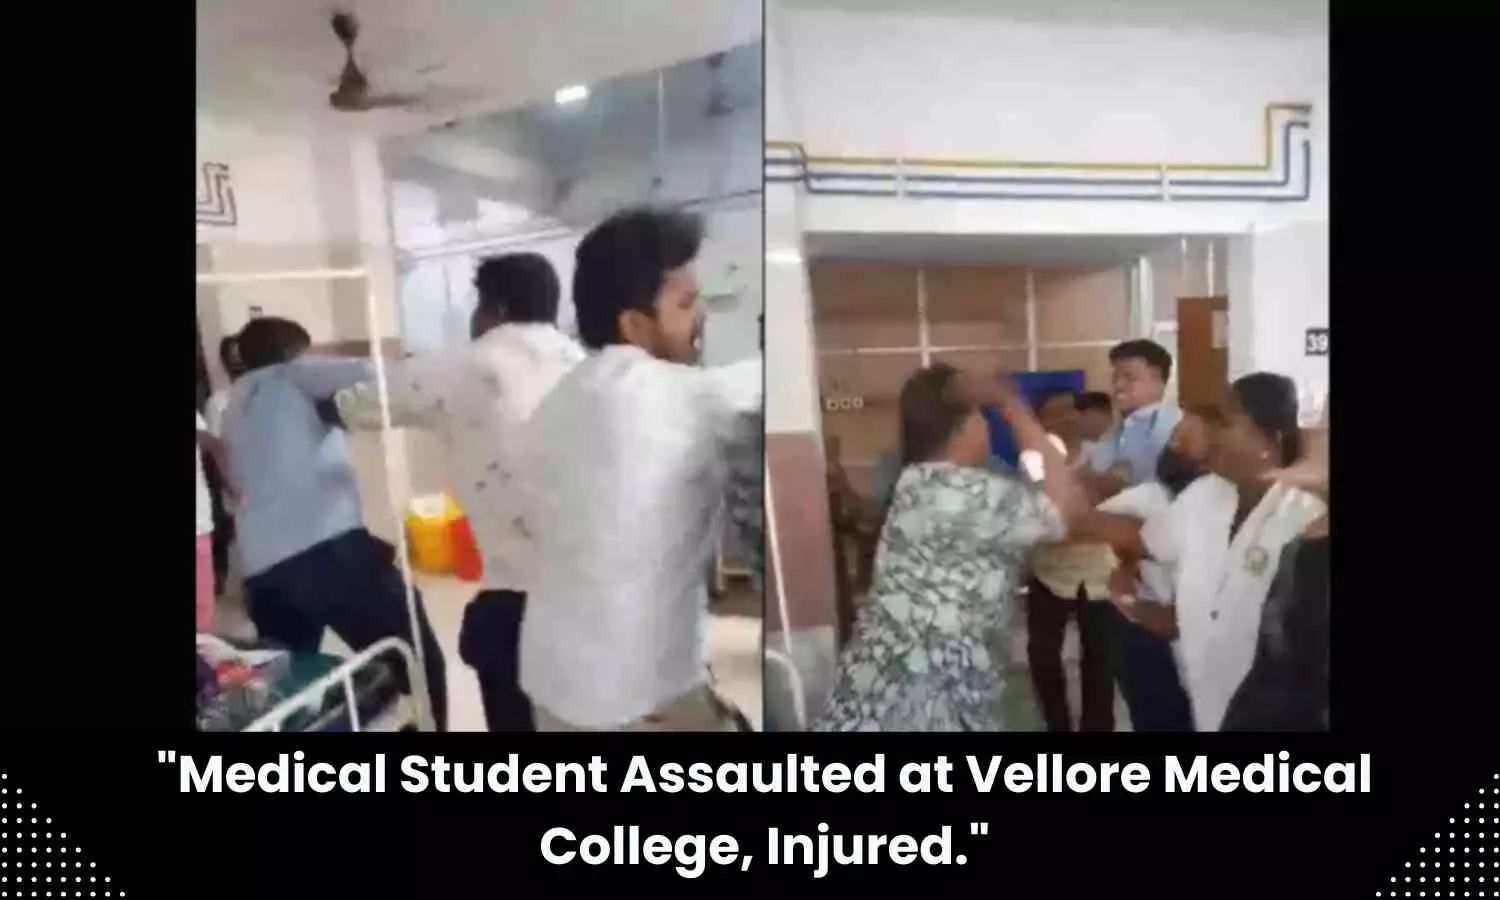 PG medical student at Vellore Medical College beaten up by patient, kin